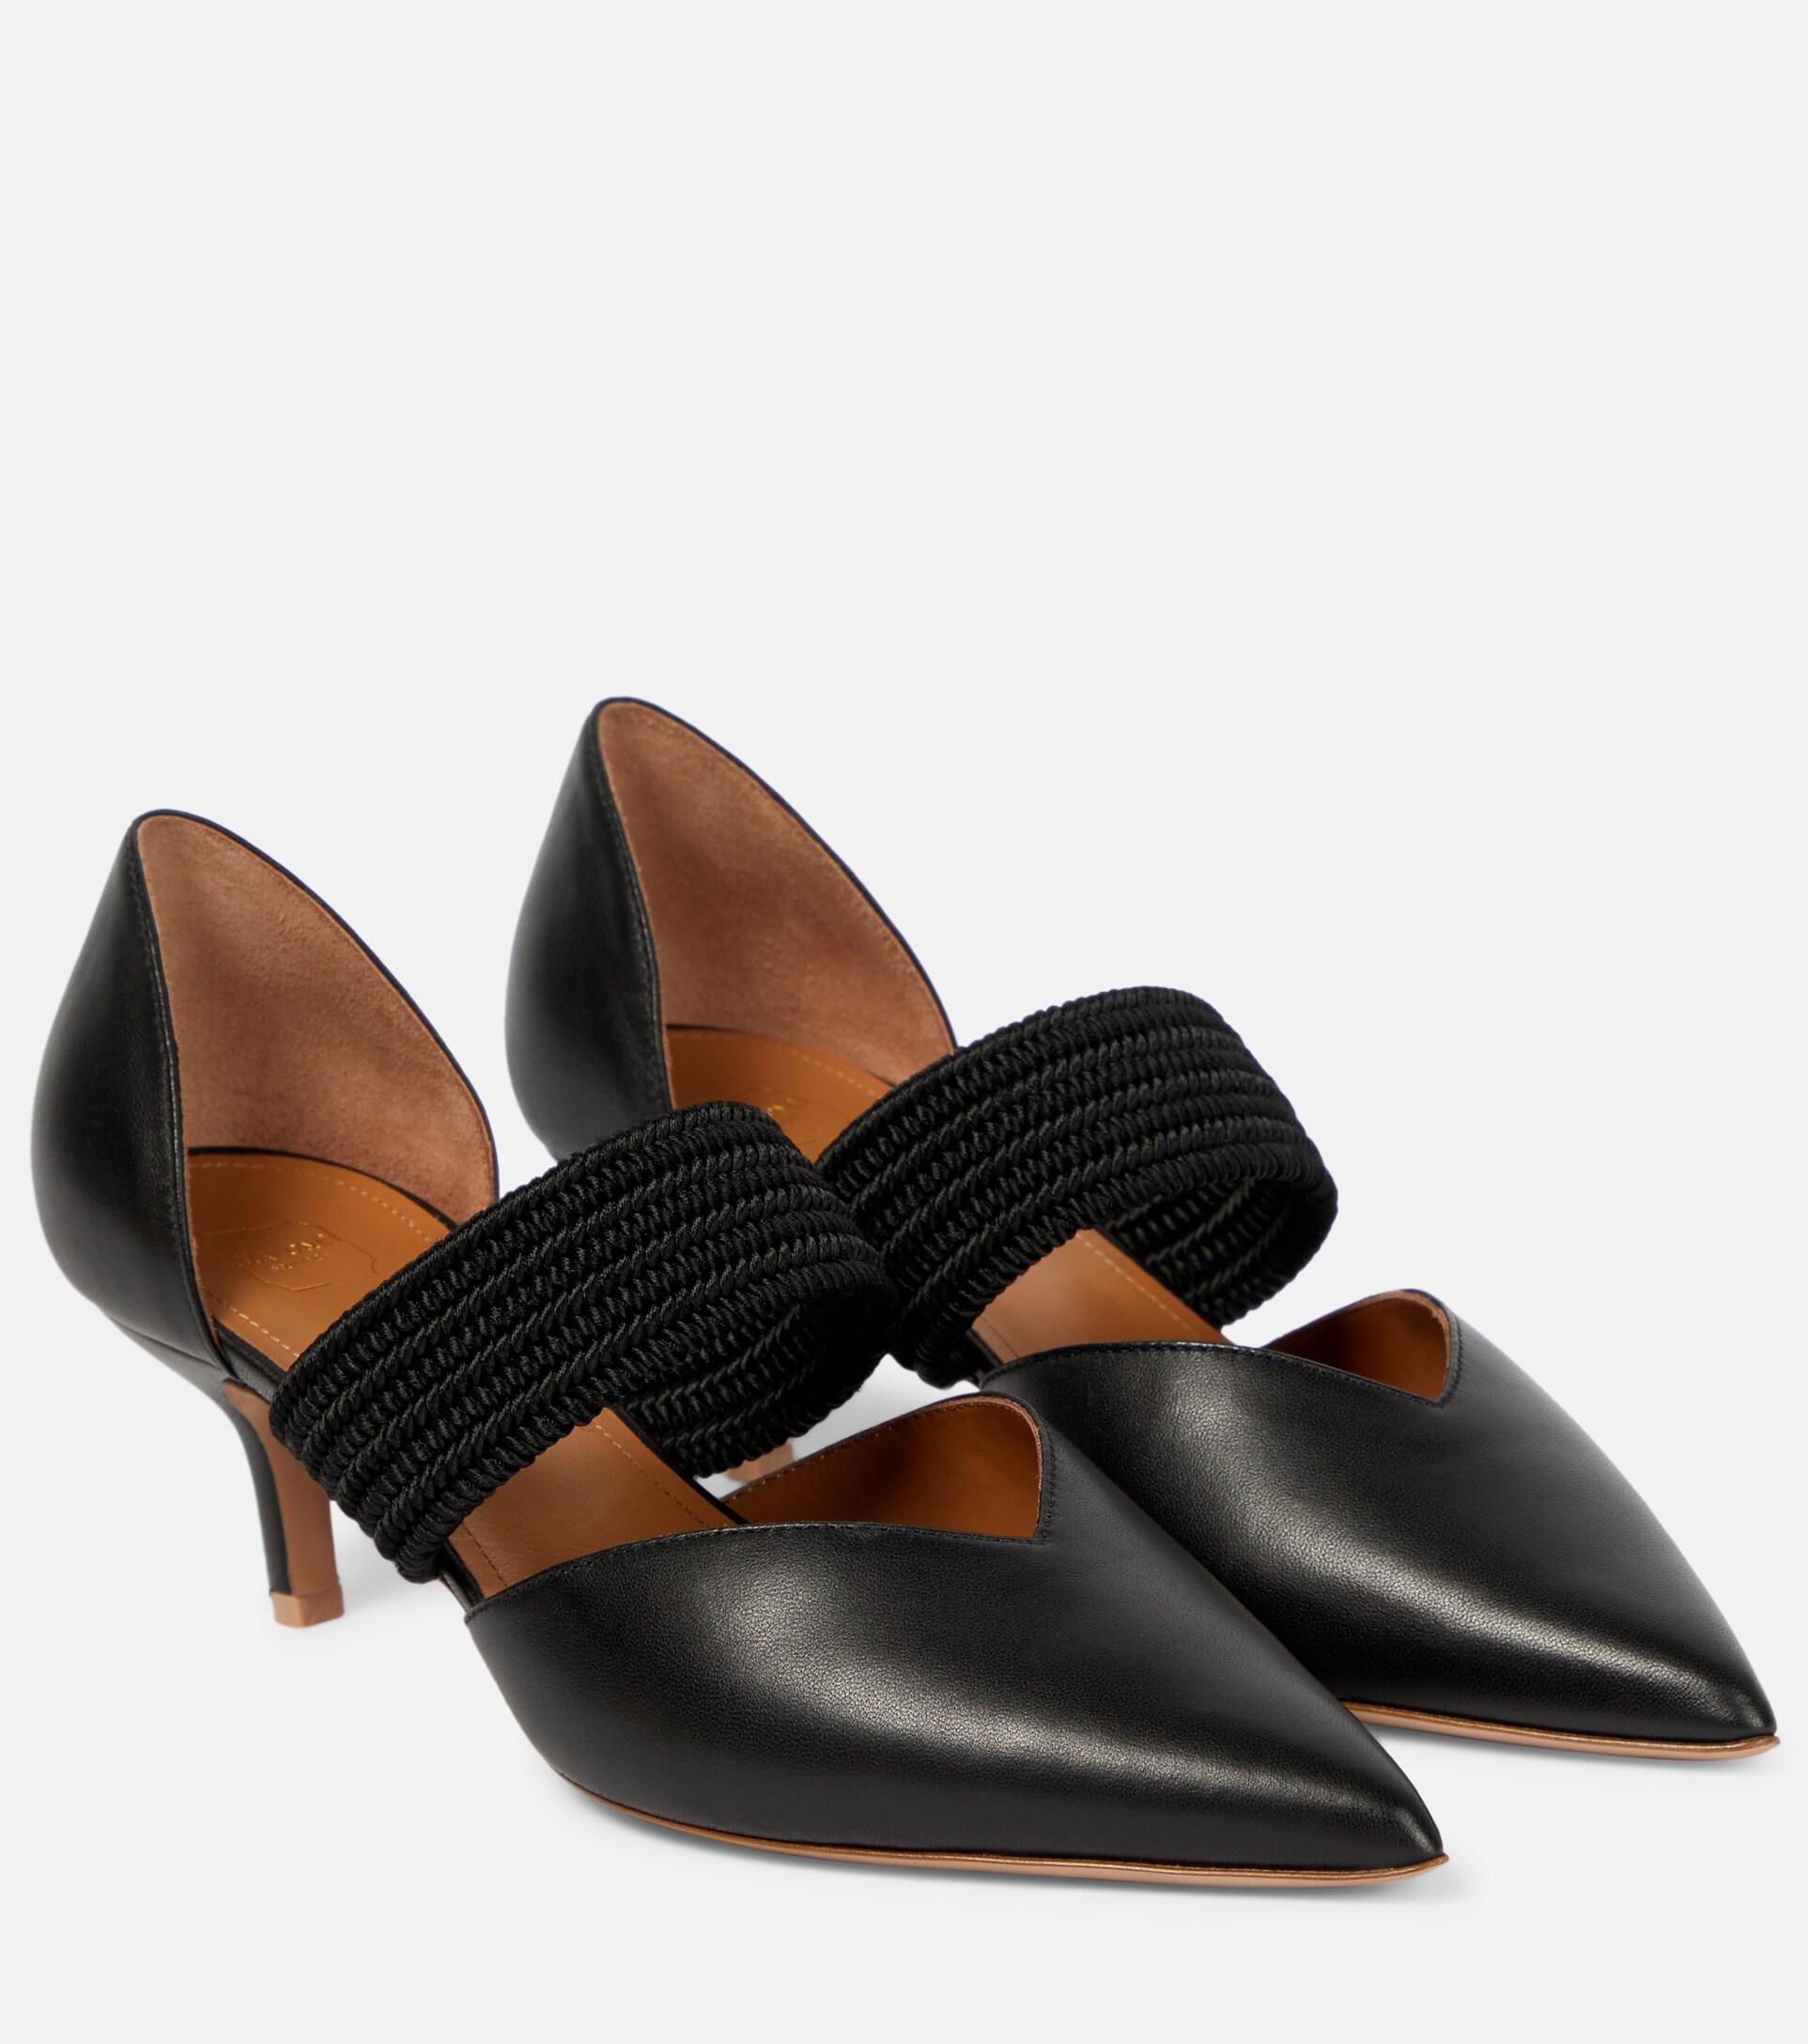 Malone Souliers Maisie 45 Leather Pumps in Black | Lyst